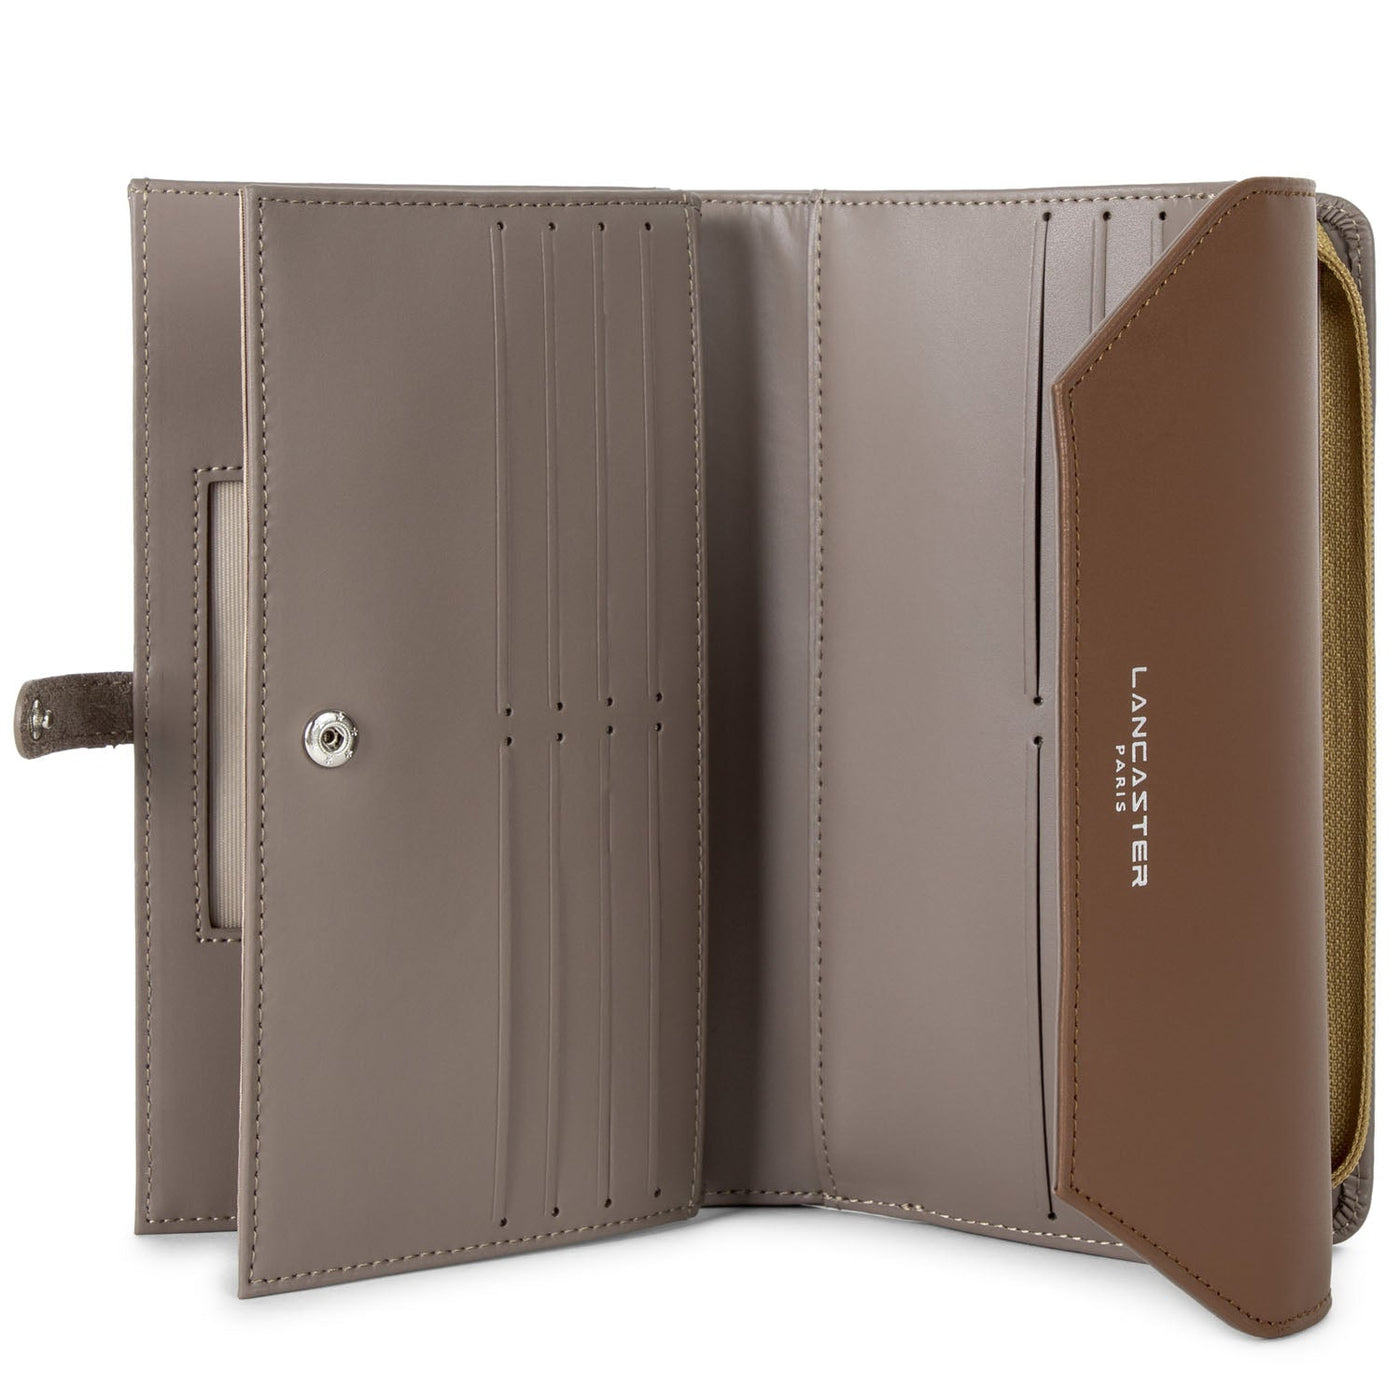 back to back organizer wallet - smooth #couleur_taupe-gingembre-vison